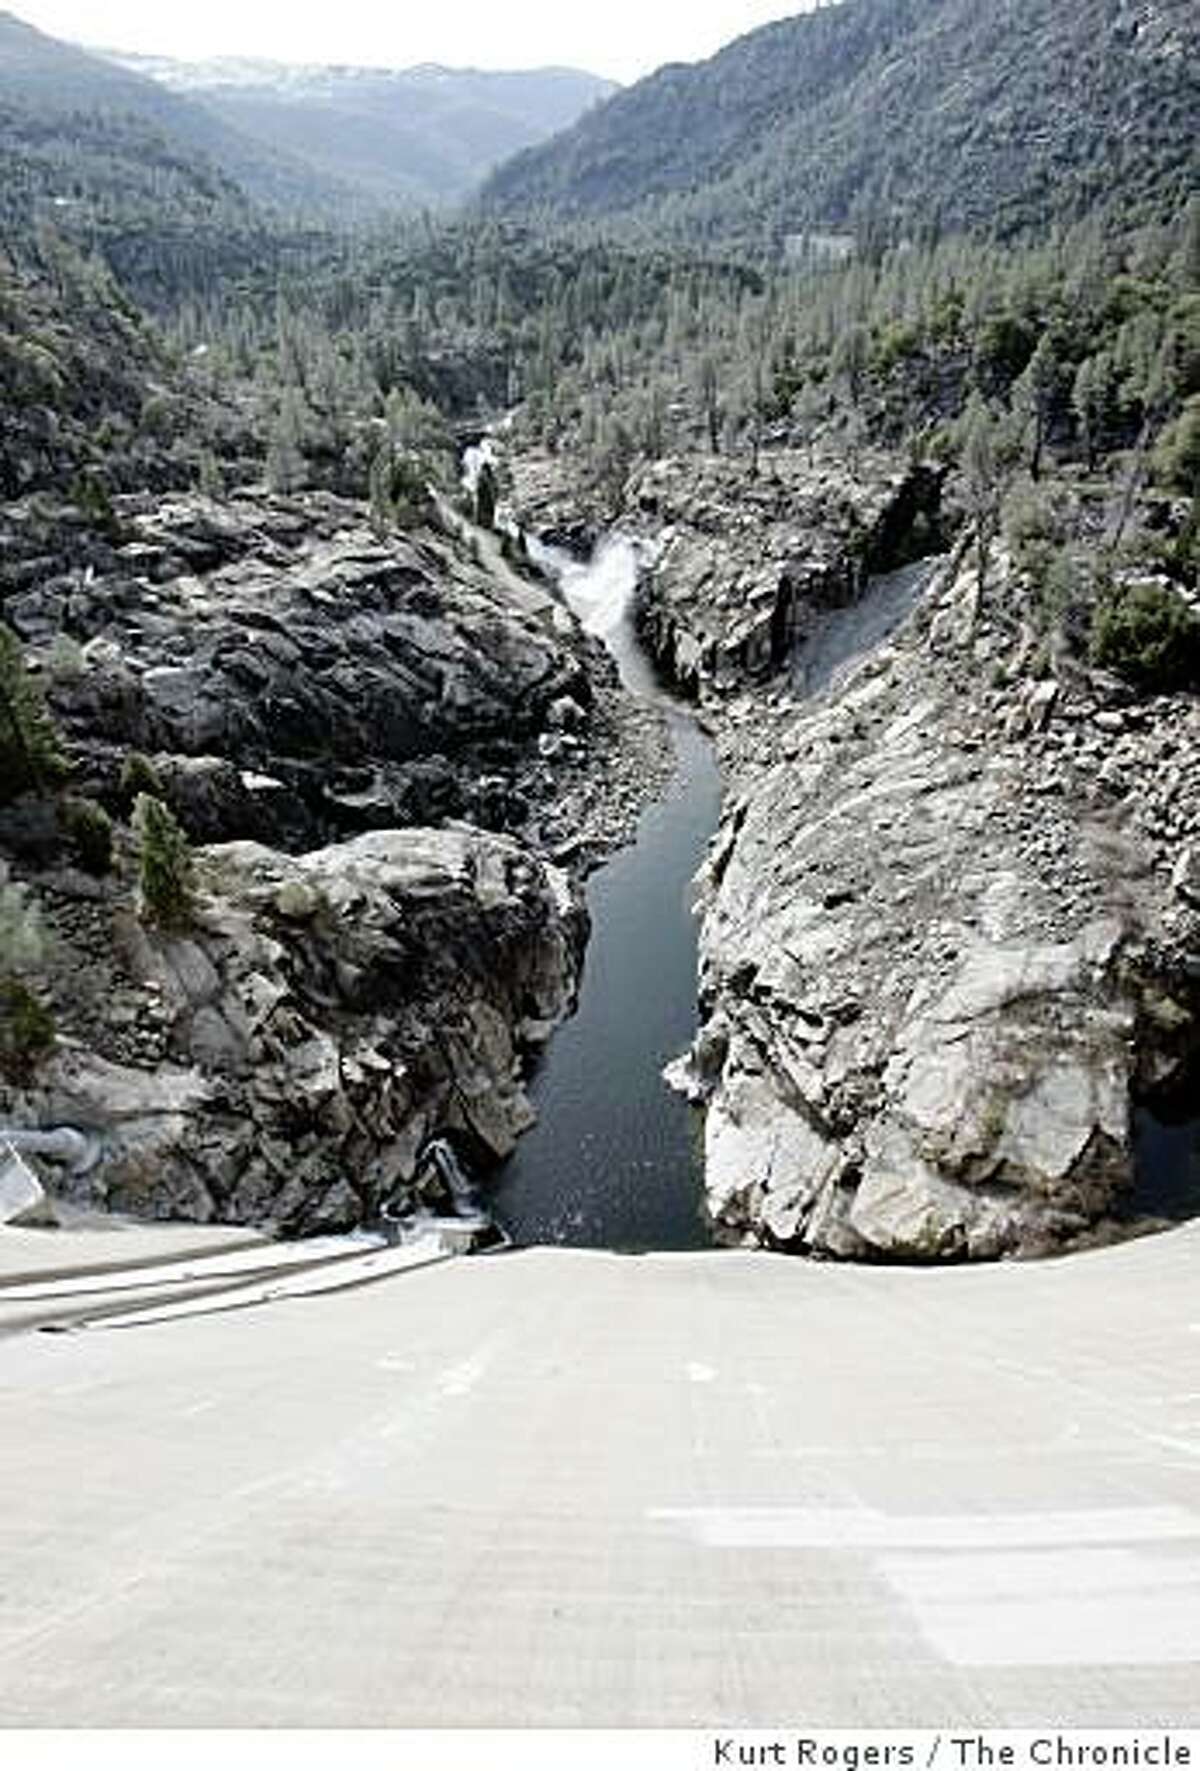 The O'Shaughnessy Dam is in Hetch Hetchy Valley, in the Grand Canyon of the Tuolumne River in Yosemite National Park. This view looks down the face of the dam at the Tuolumne River below.